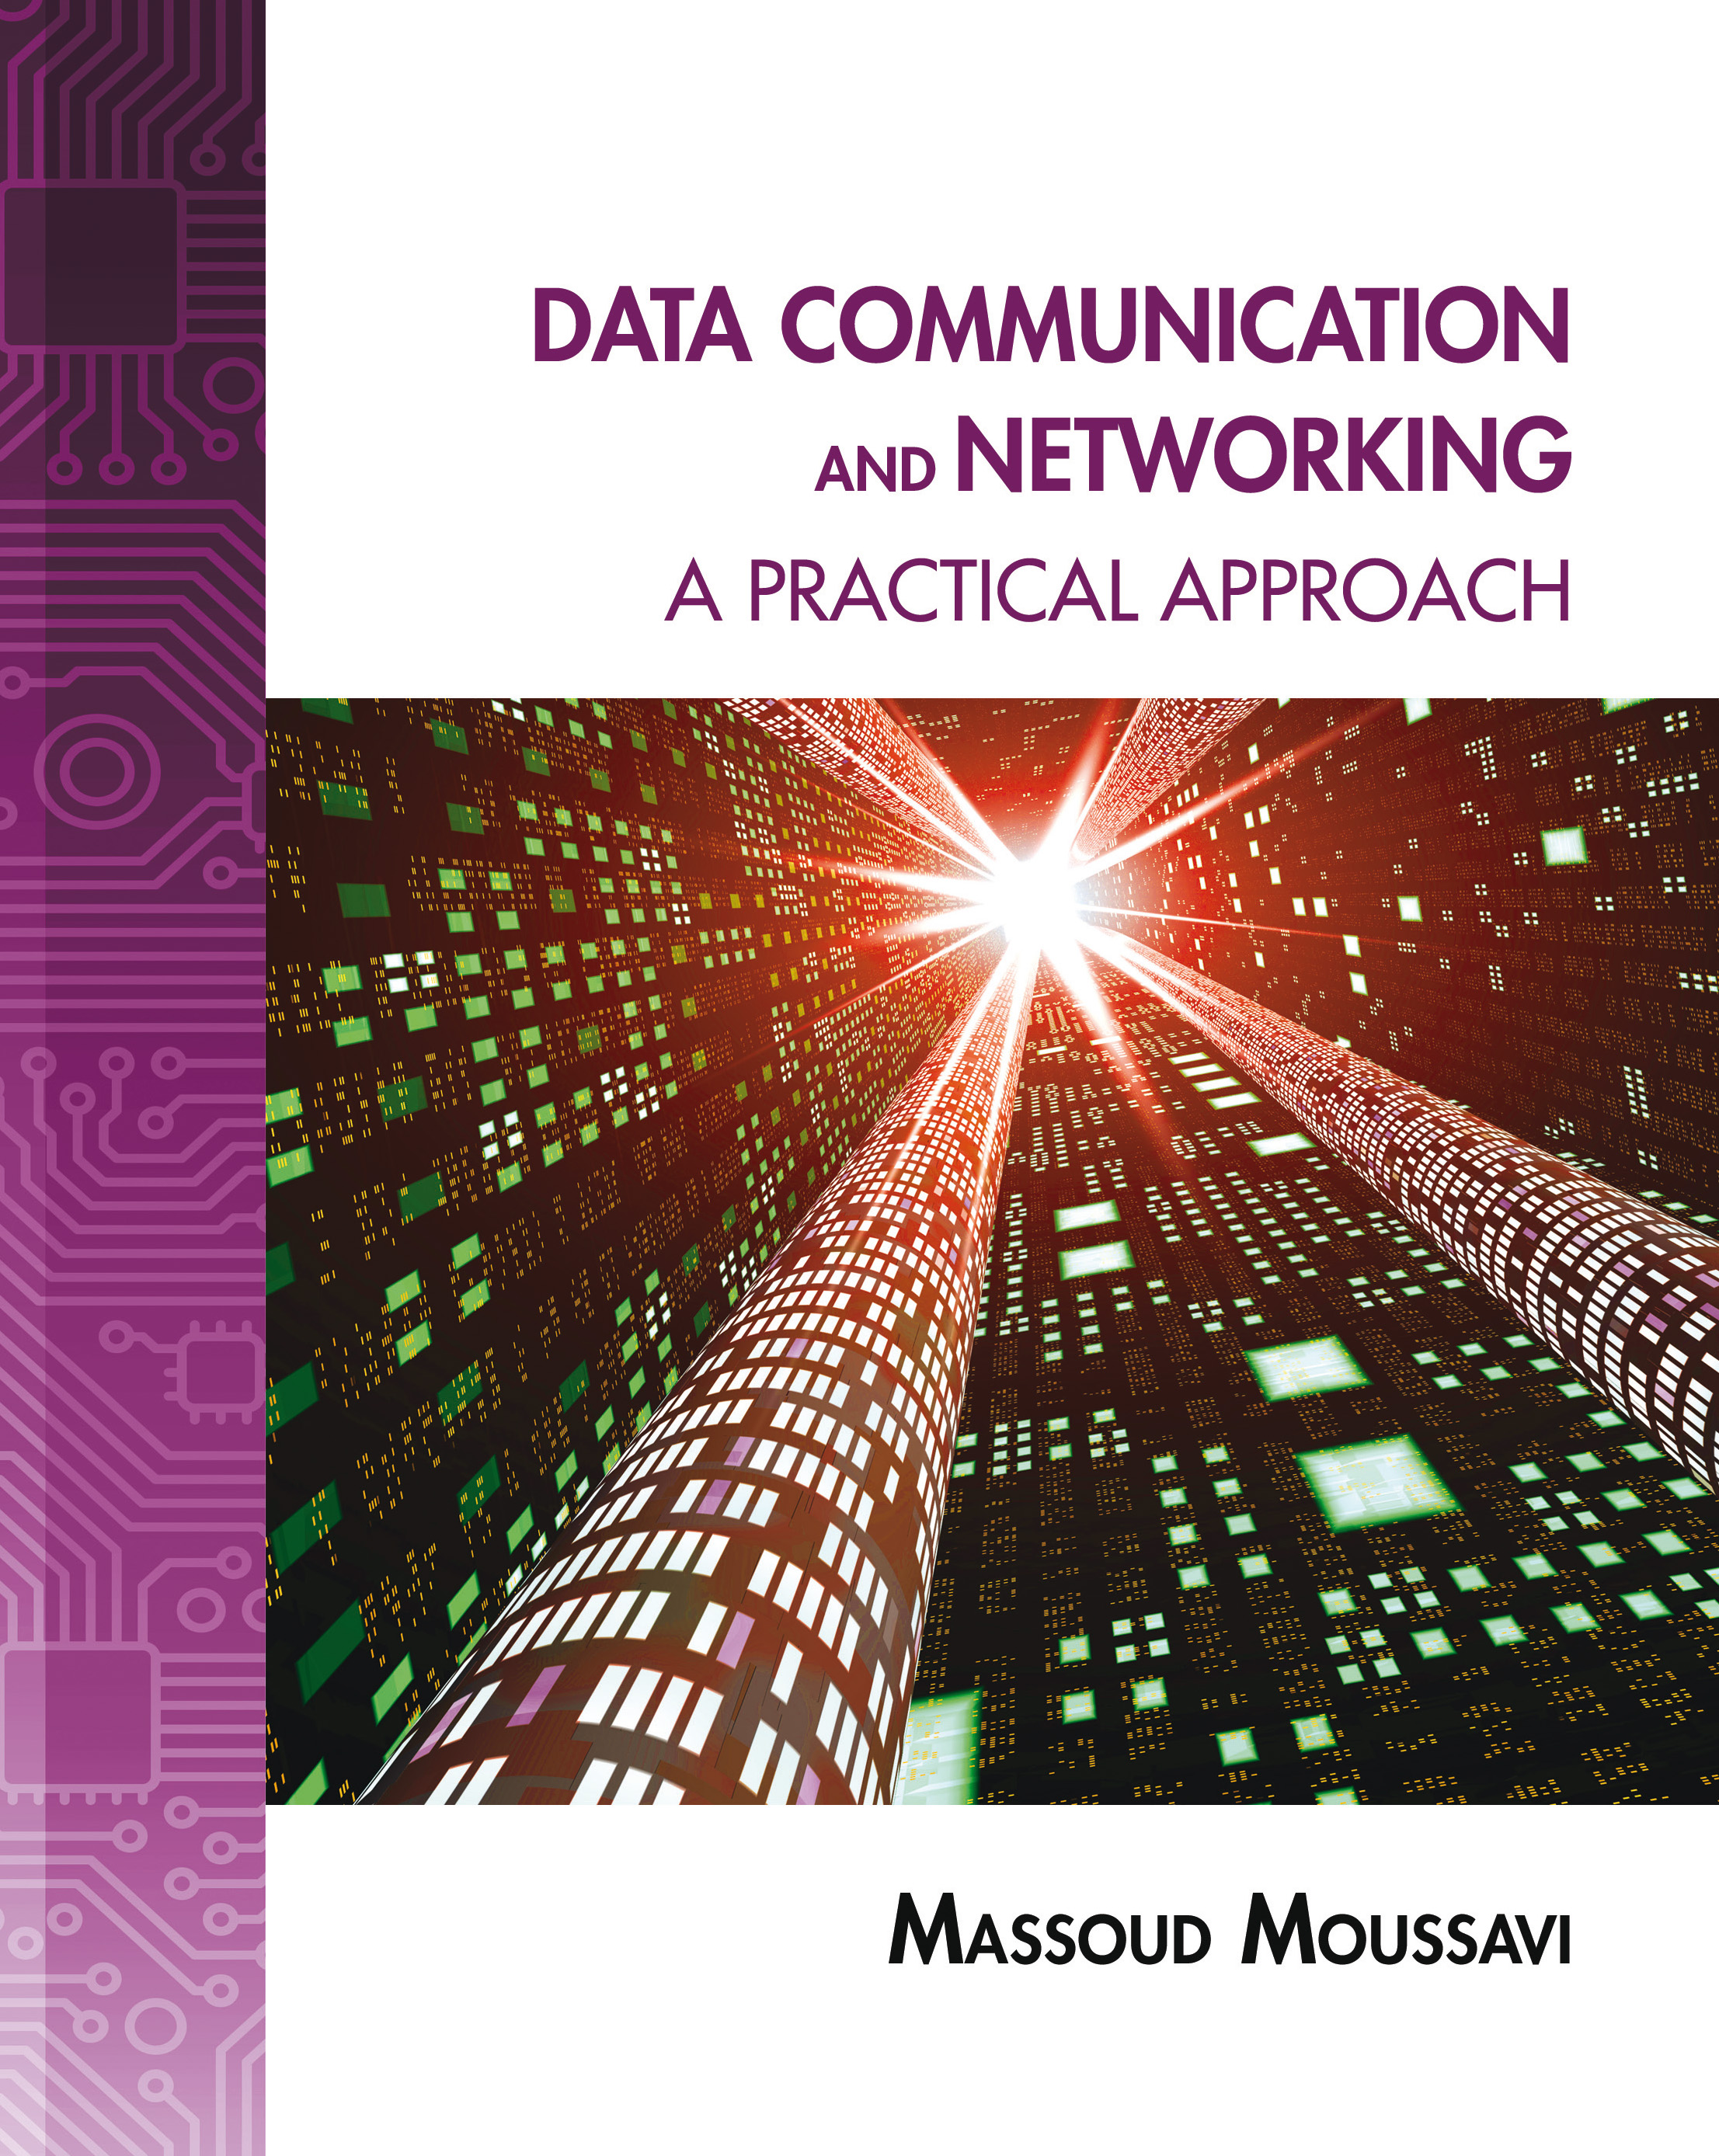 Data Communication and Networking: A Practical Approach